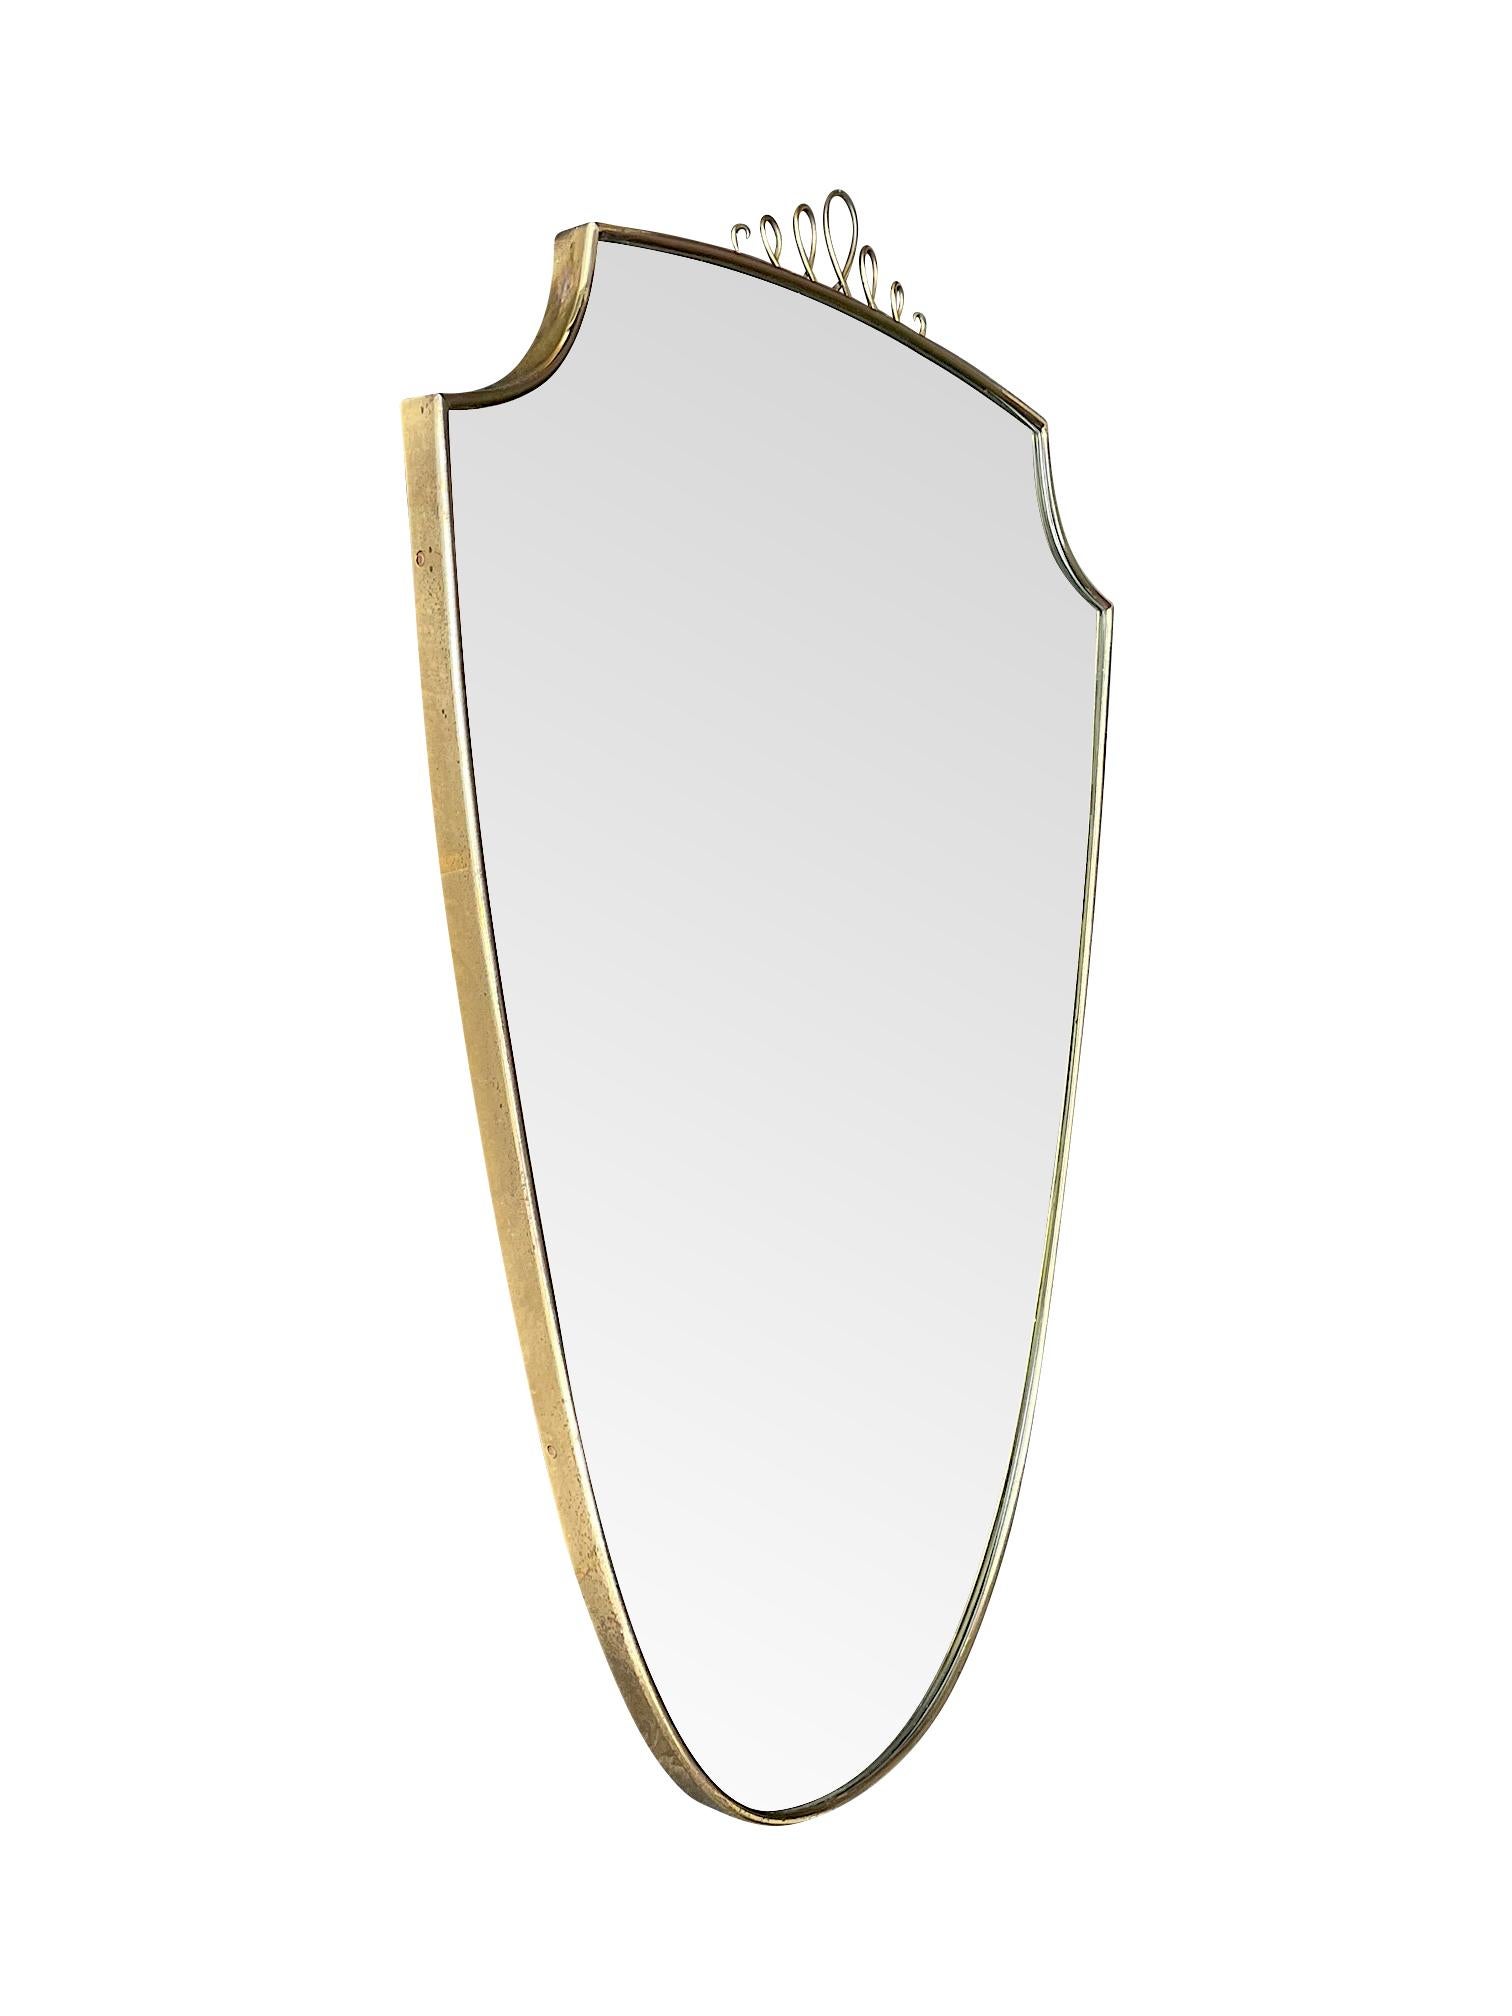 An original 1950s Italian brass shield mirror in the style of Gio Ponti with pretty central decorative detail. Mounted on solid wood back.